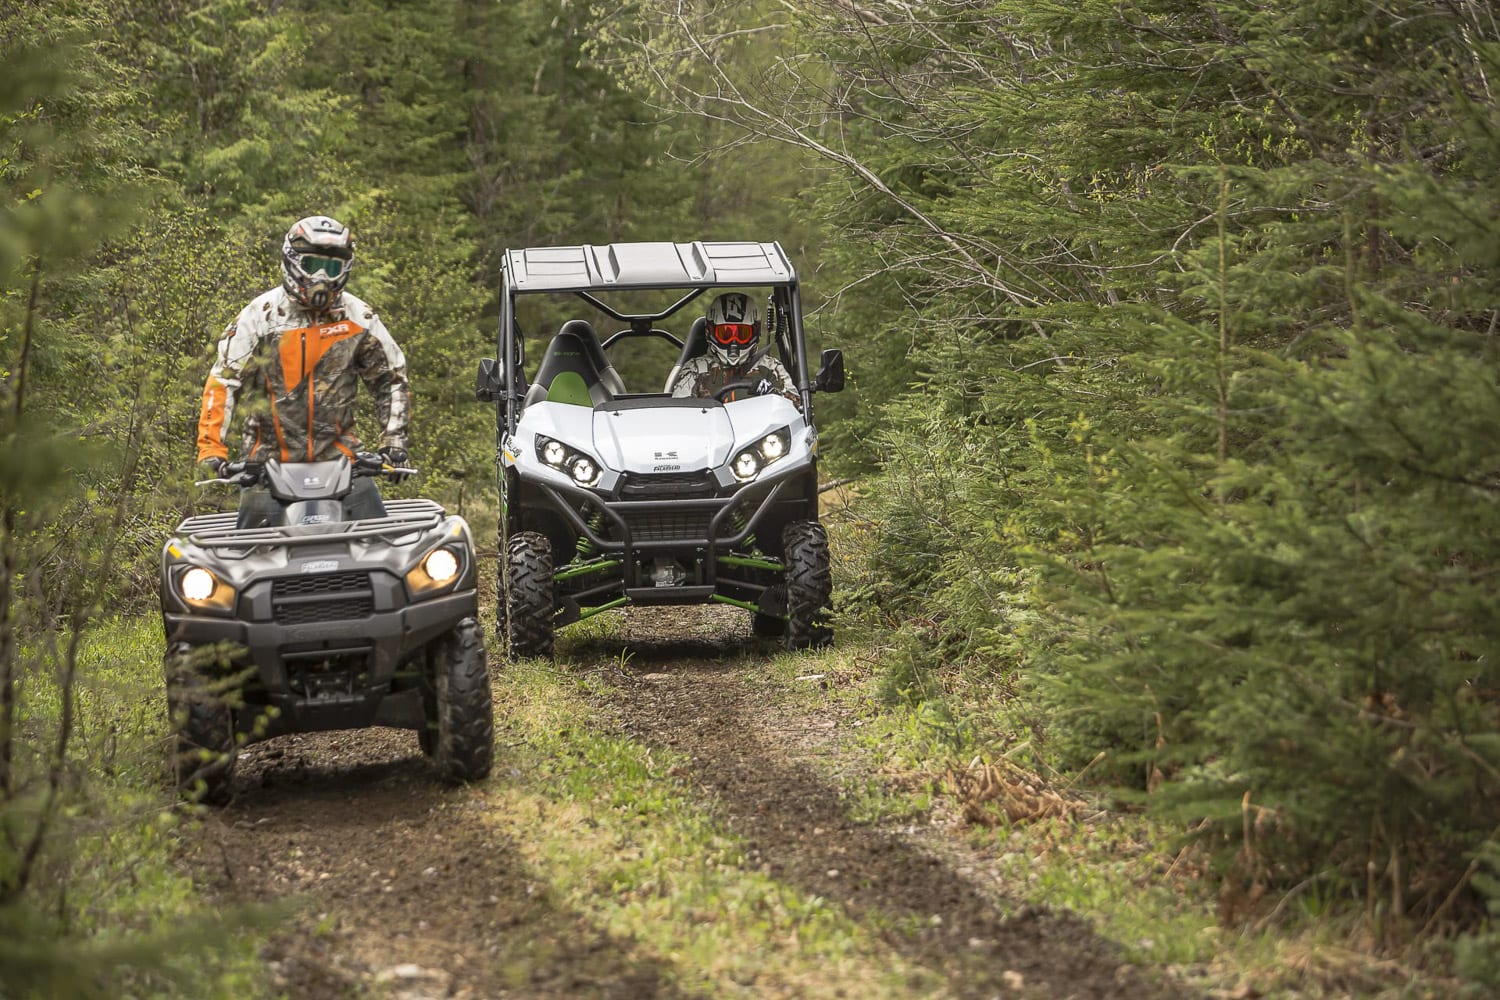 How to choose the right equipment for your ATV